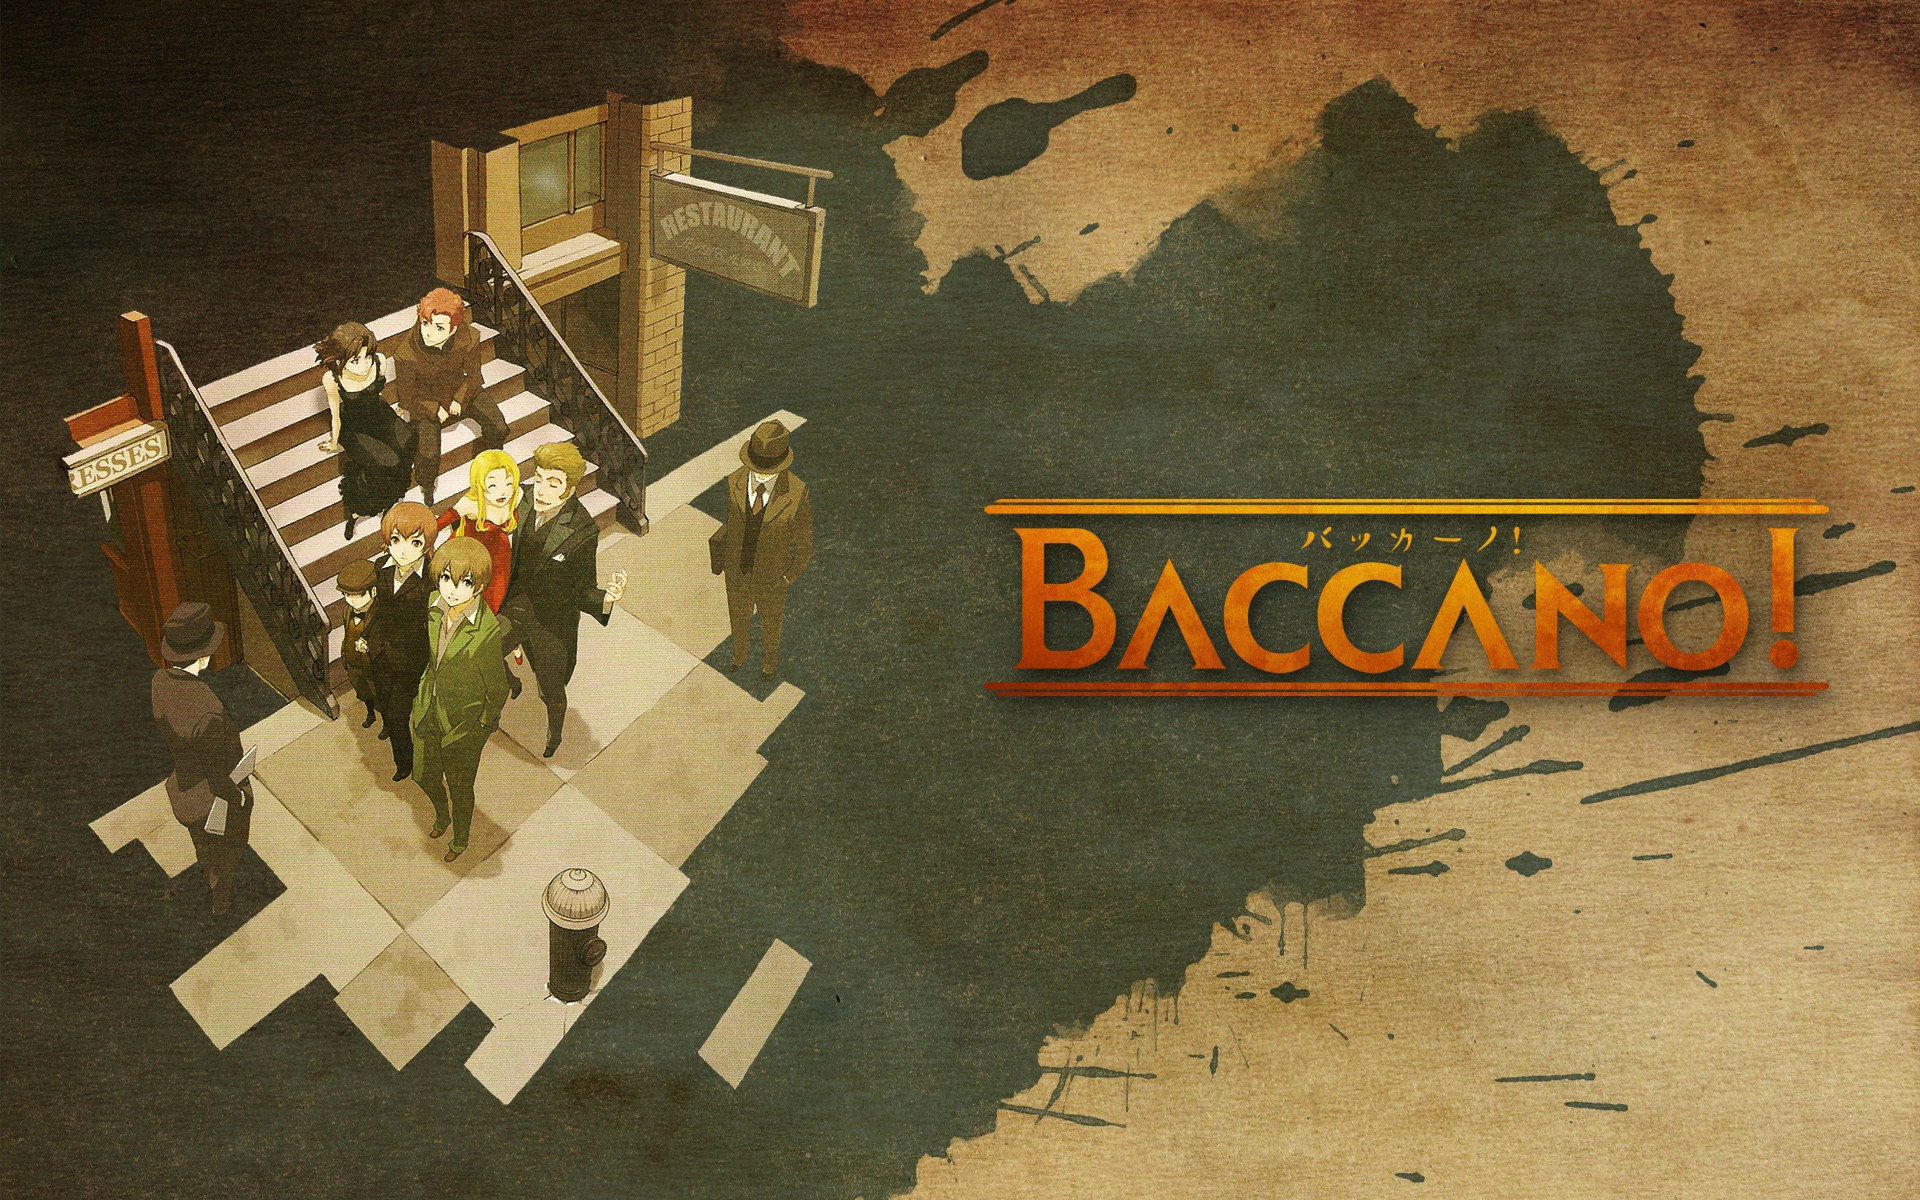 Baccano Wallpaper - Baccano Wallpaper Hd , HD Wallpaper & Backgrounds